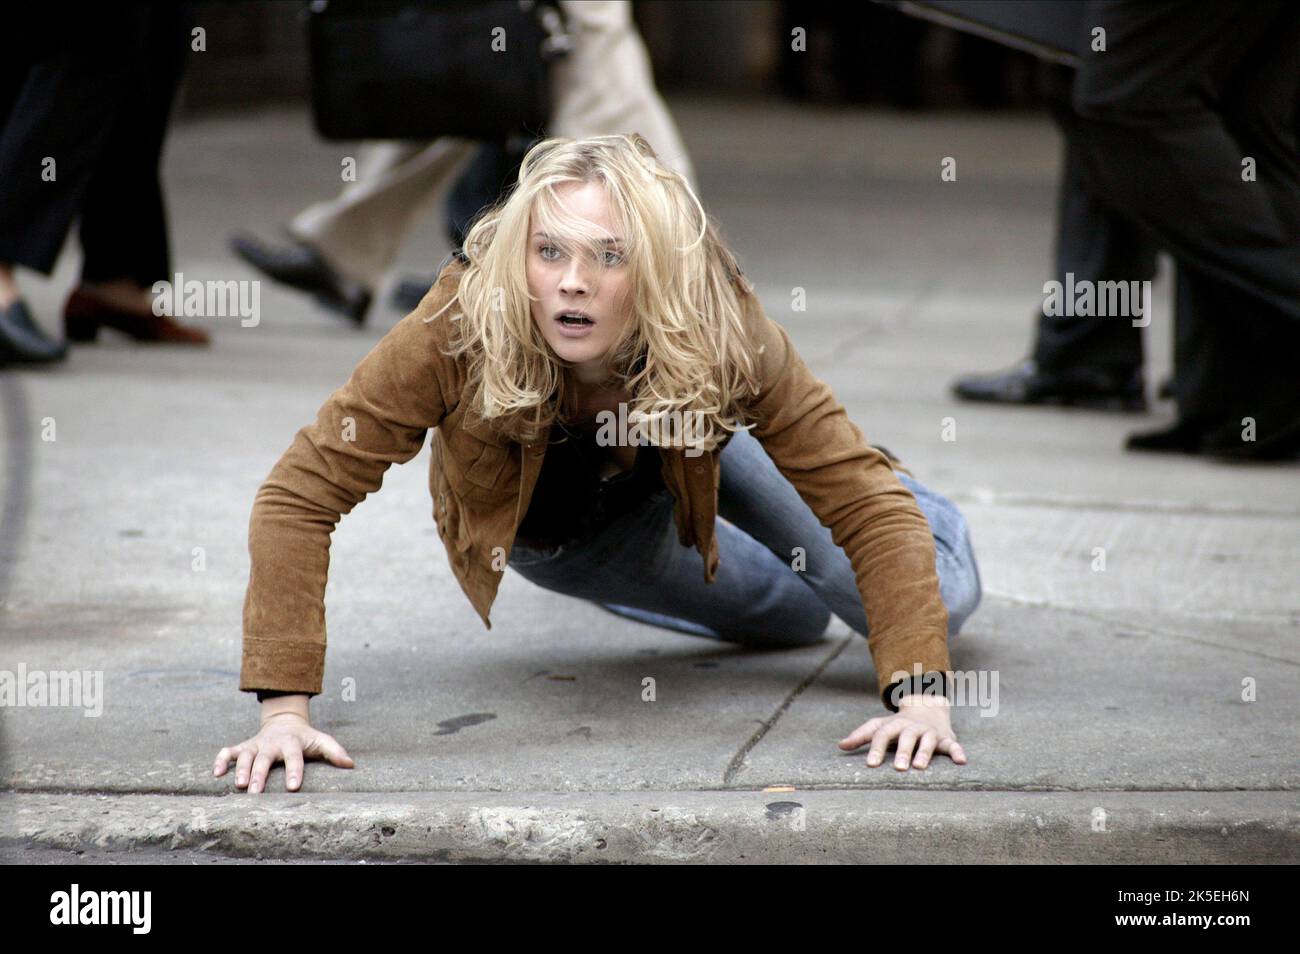 National treasure diane kruger hi-res stock photography and images - Alamy